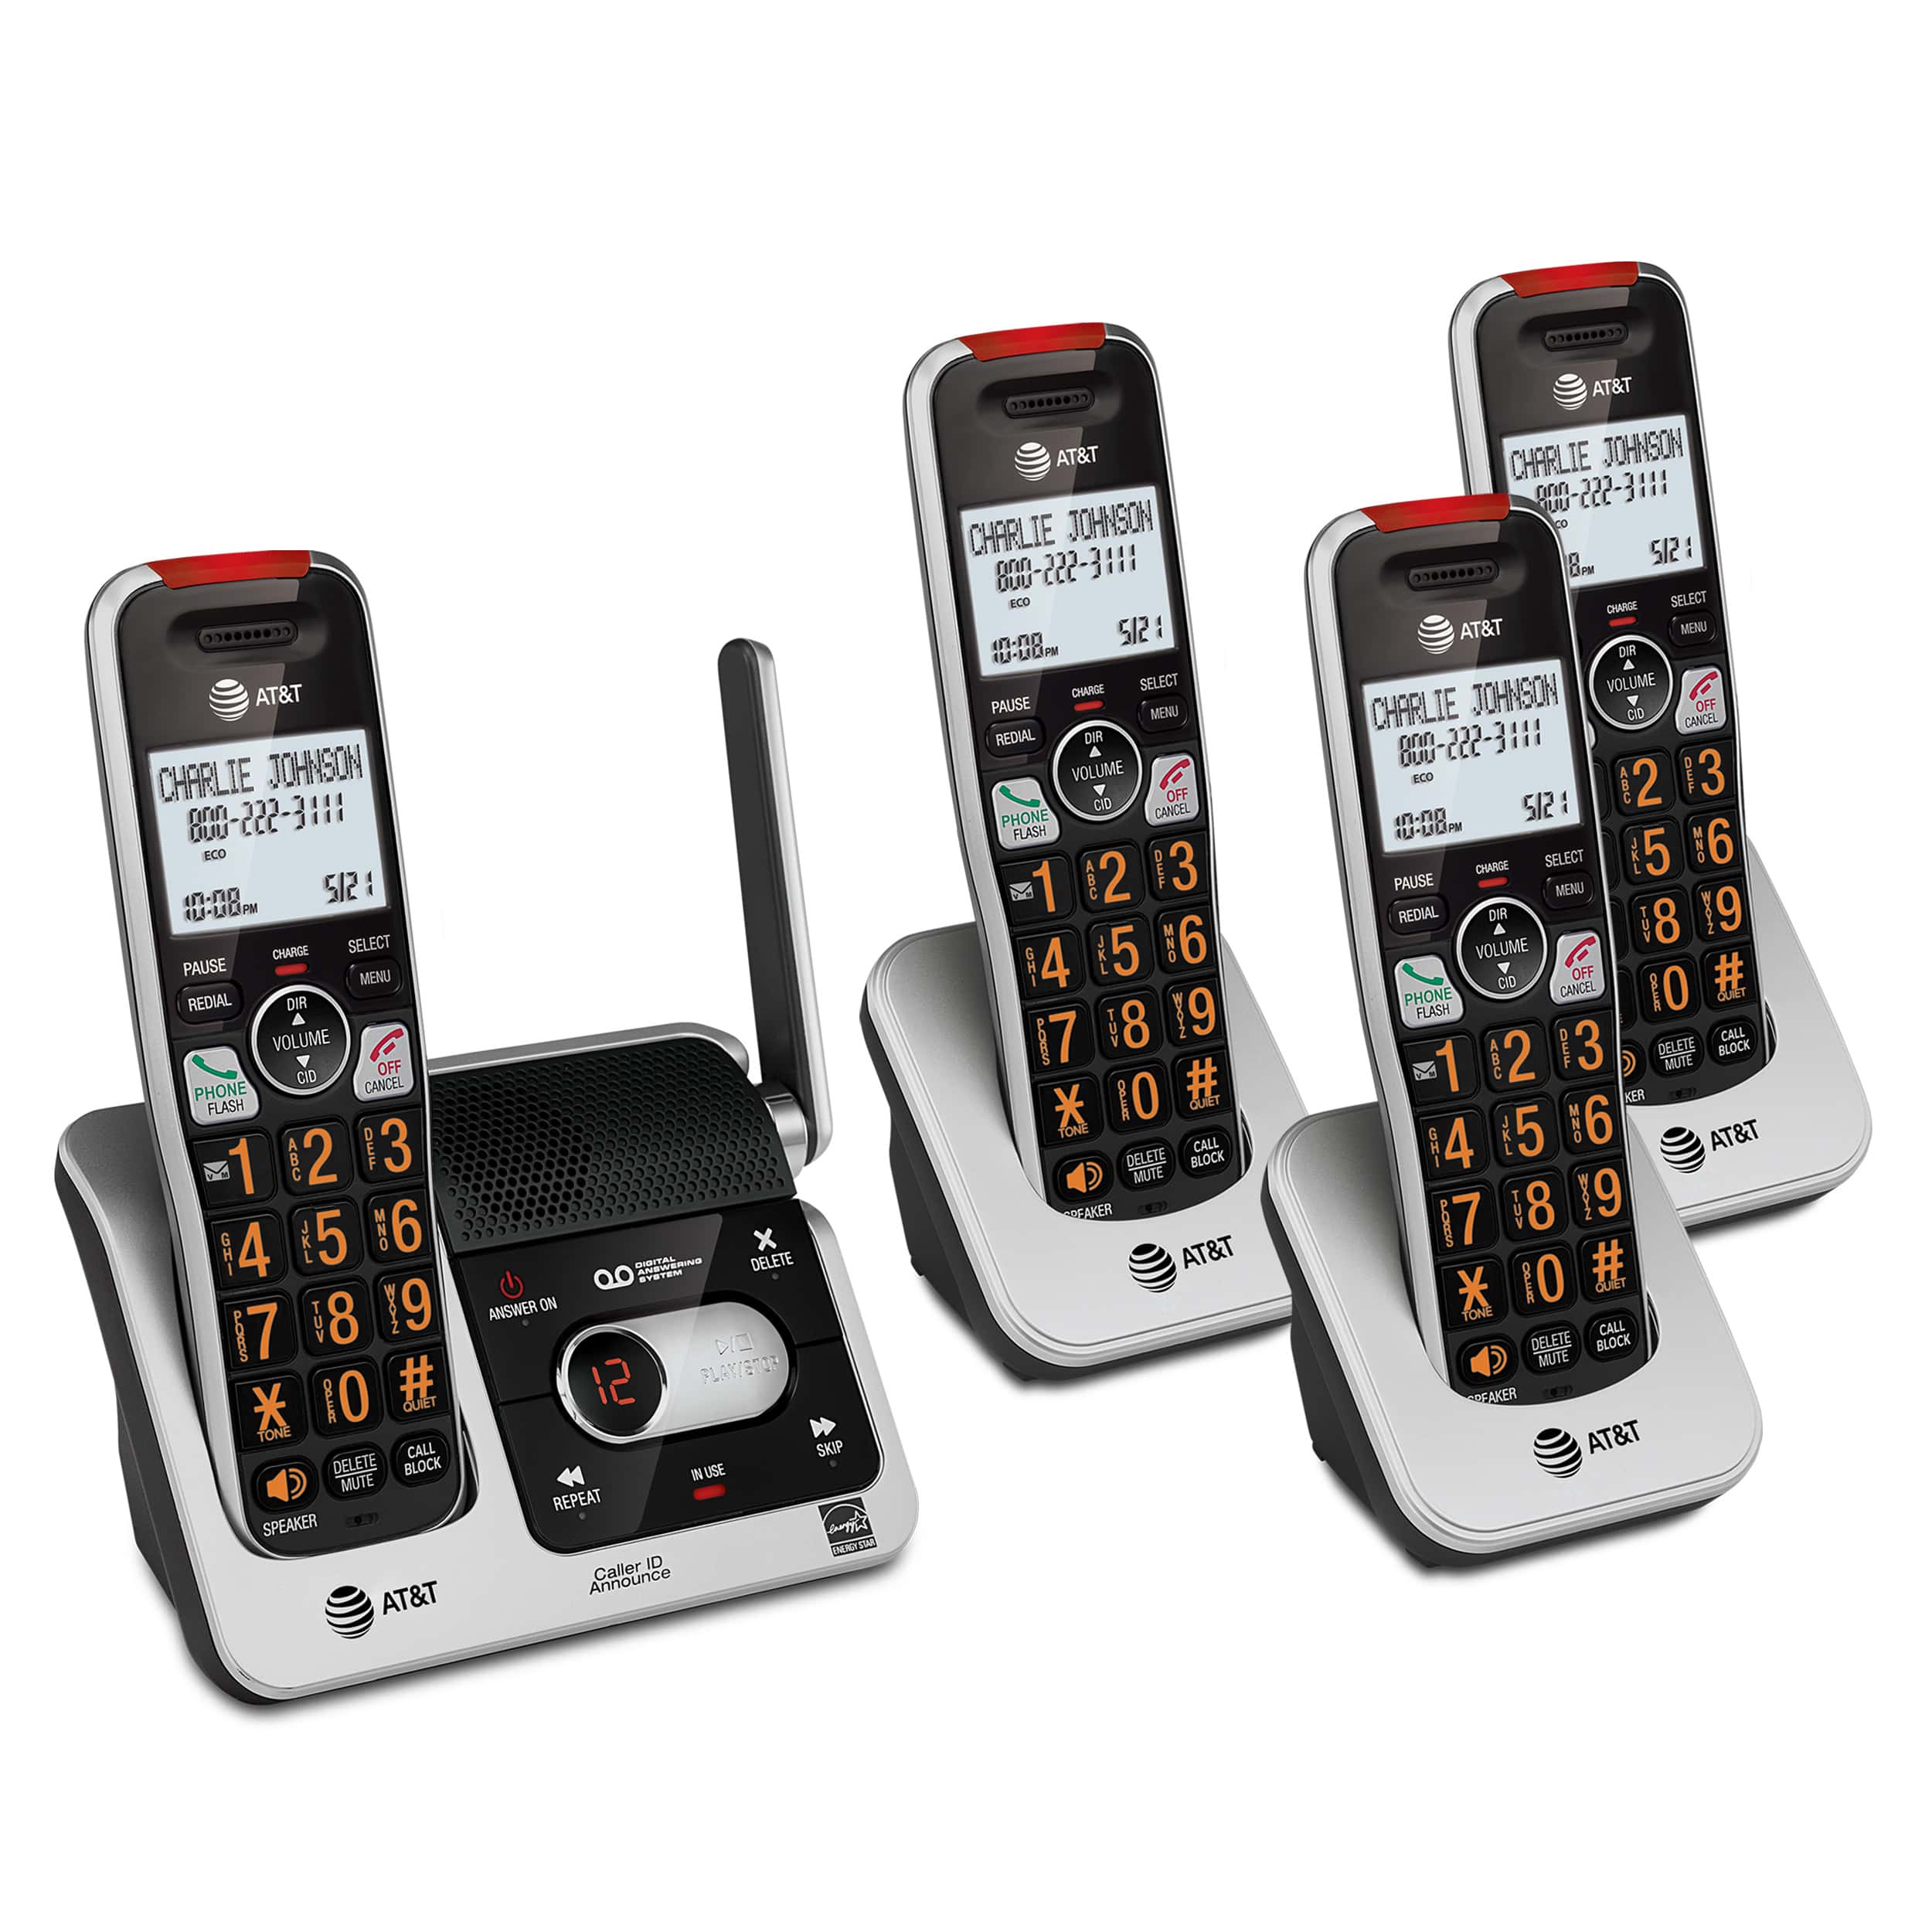 4-Handset Cordless Phone with Unsurpassed Range, Smart Call Blocker and Answering System - view 9